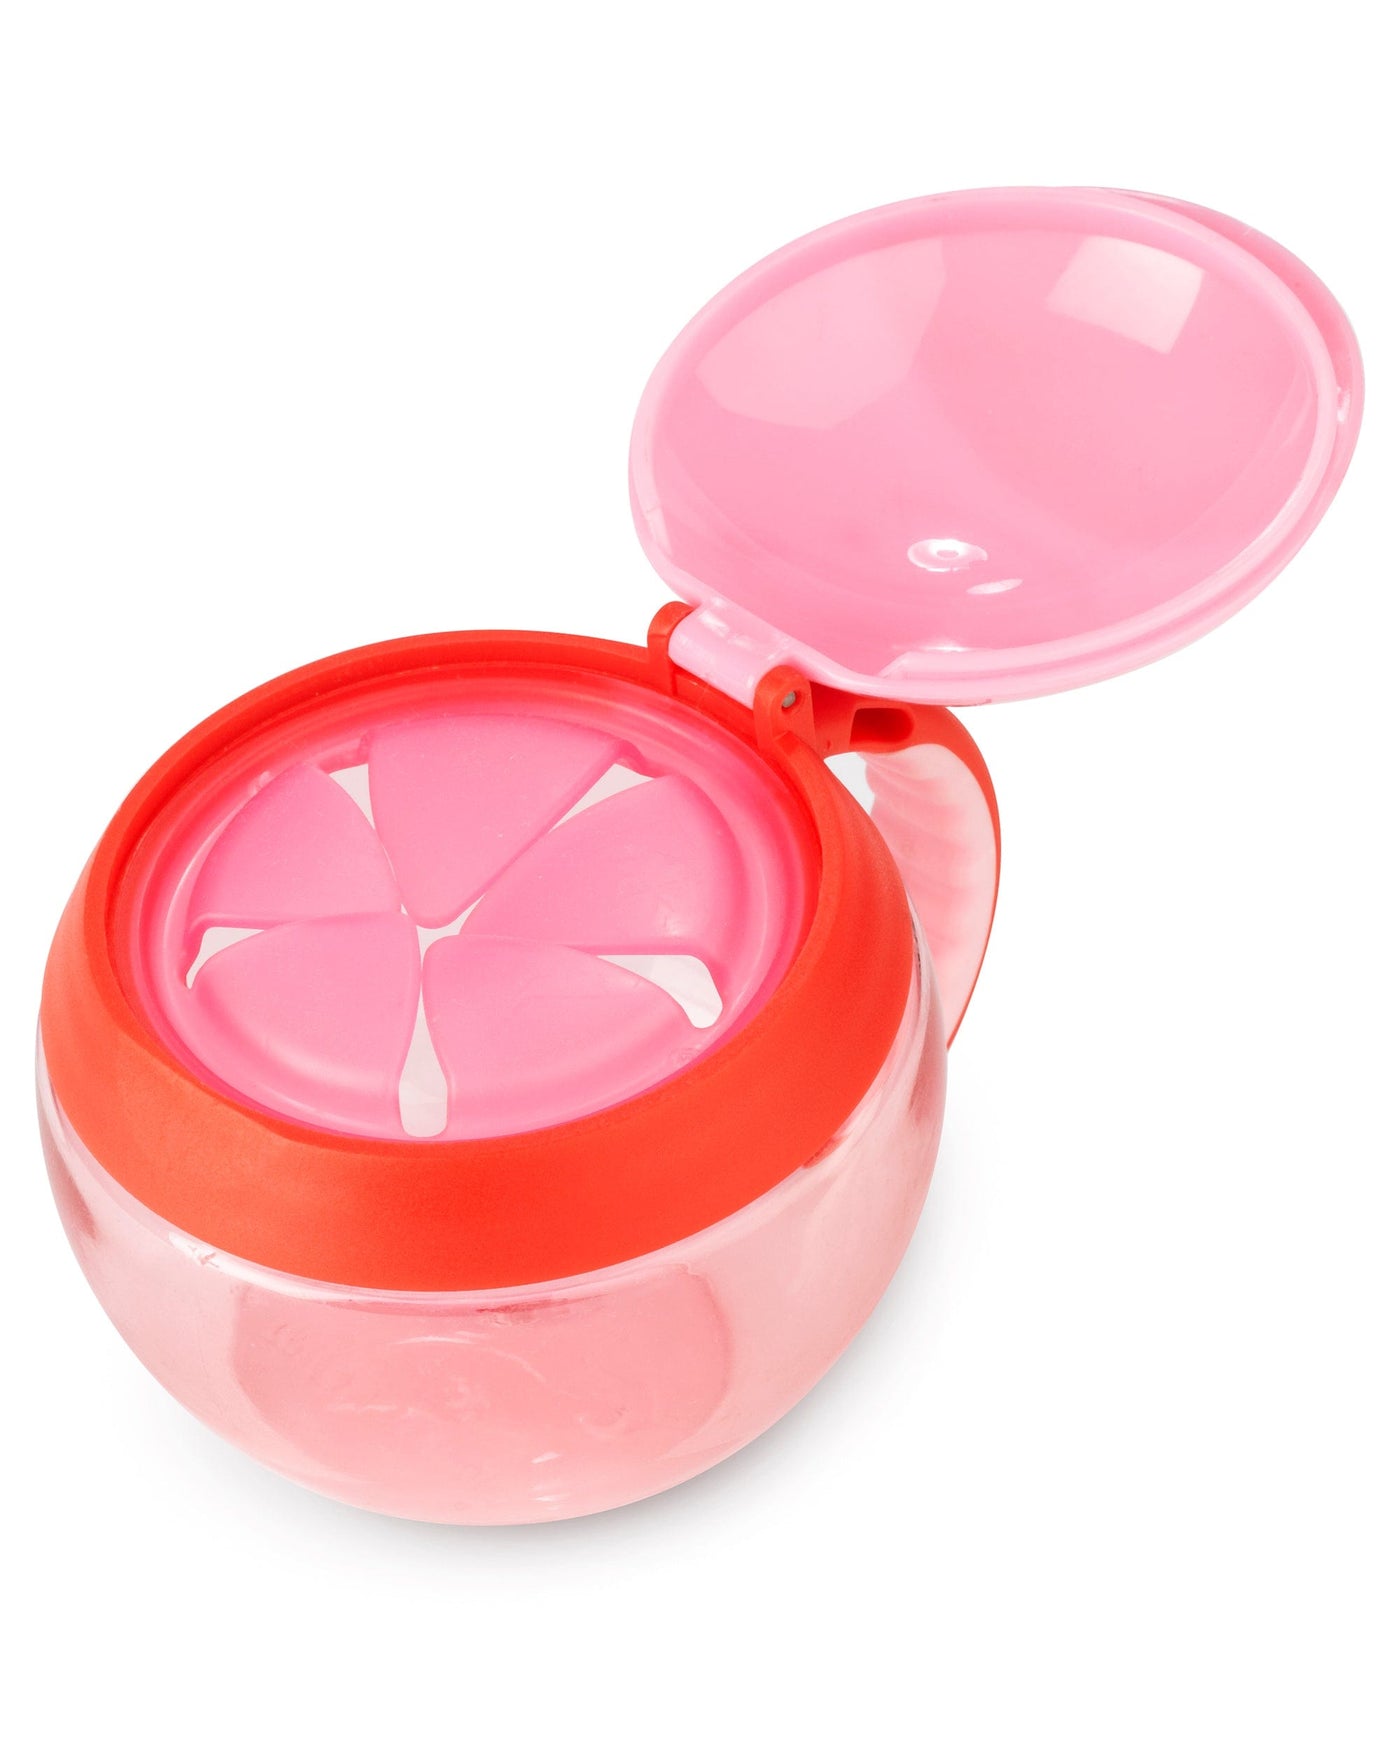 Zoo Snack Cup - Ladybird | Skip Hop® by Skip Hop, USA Baby Care